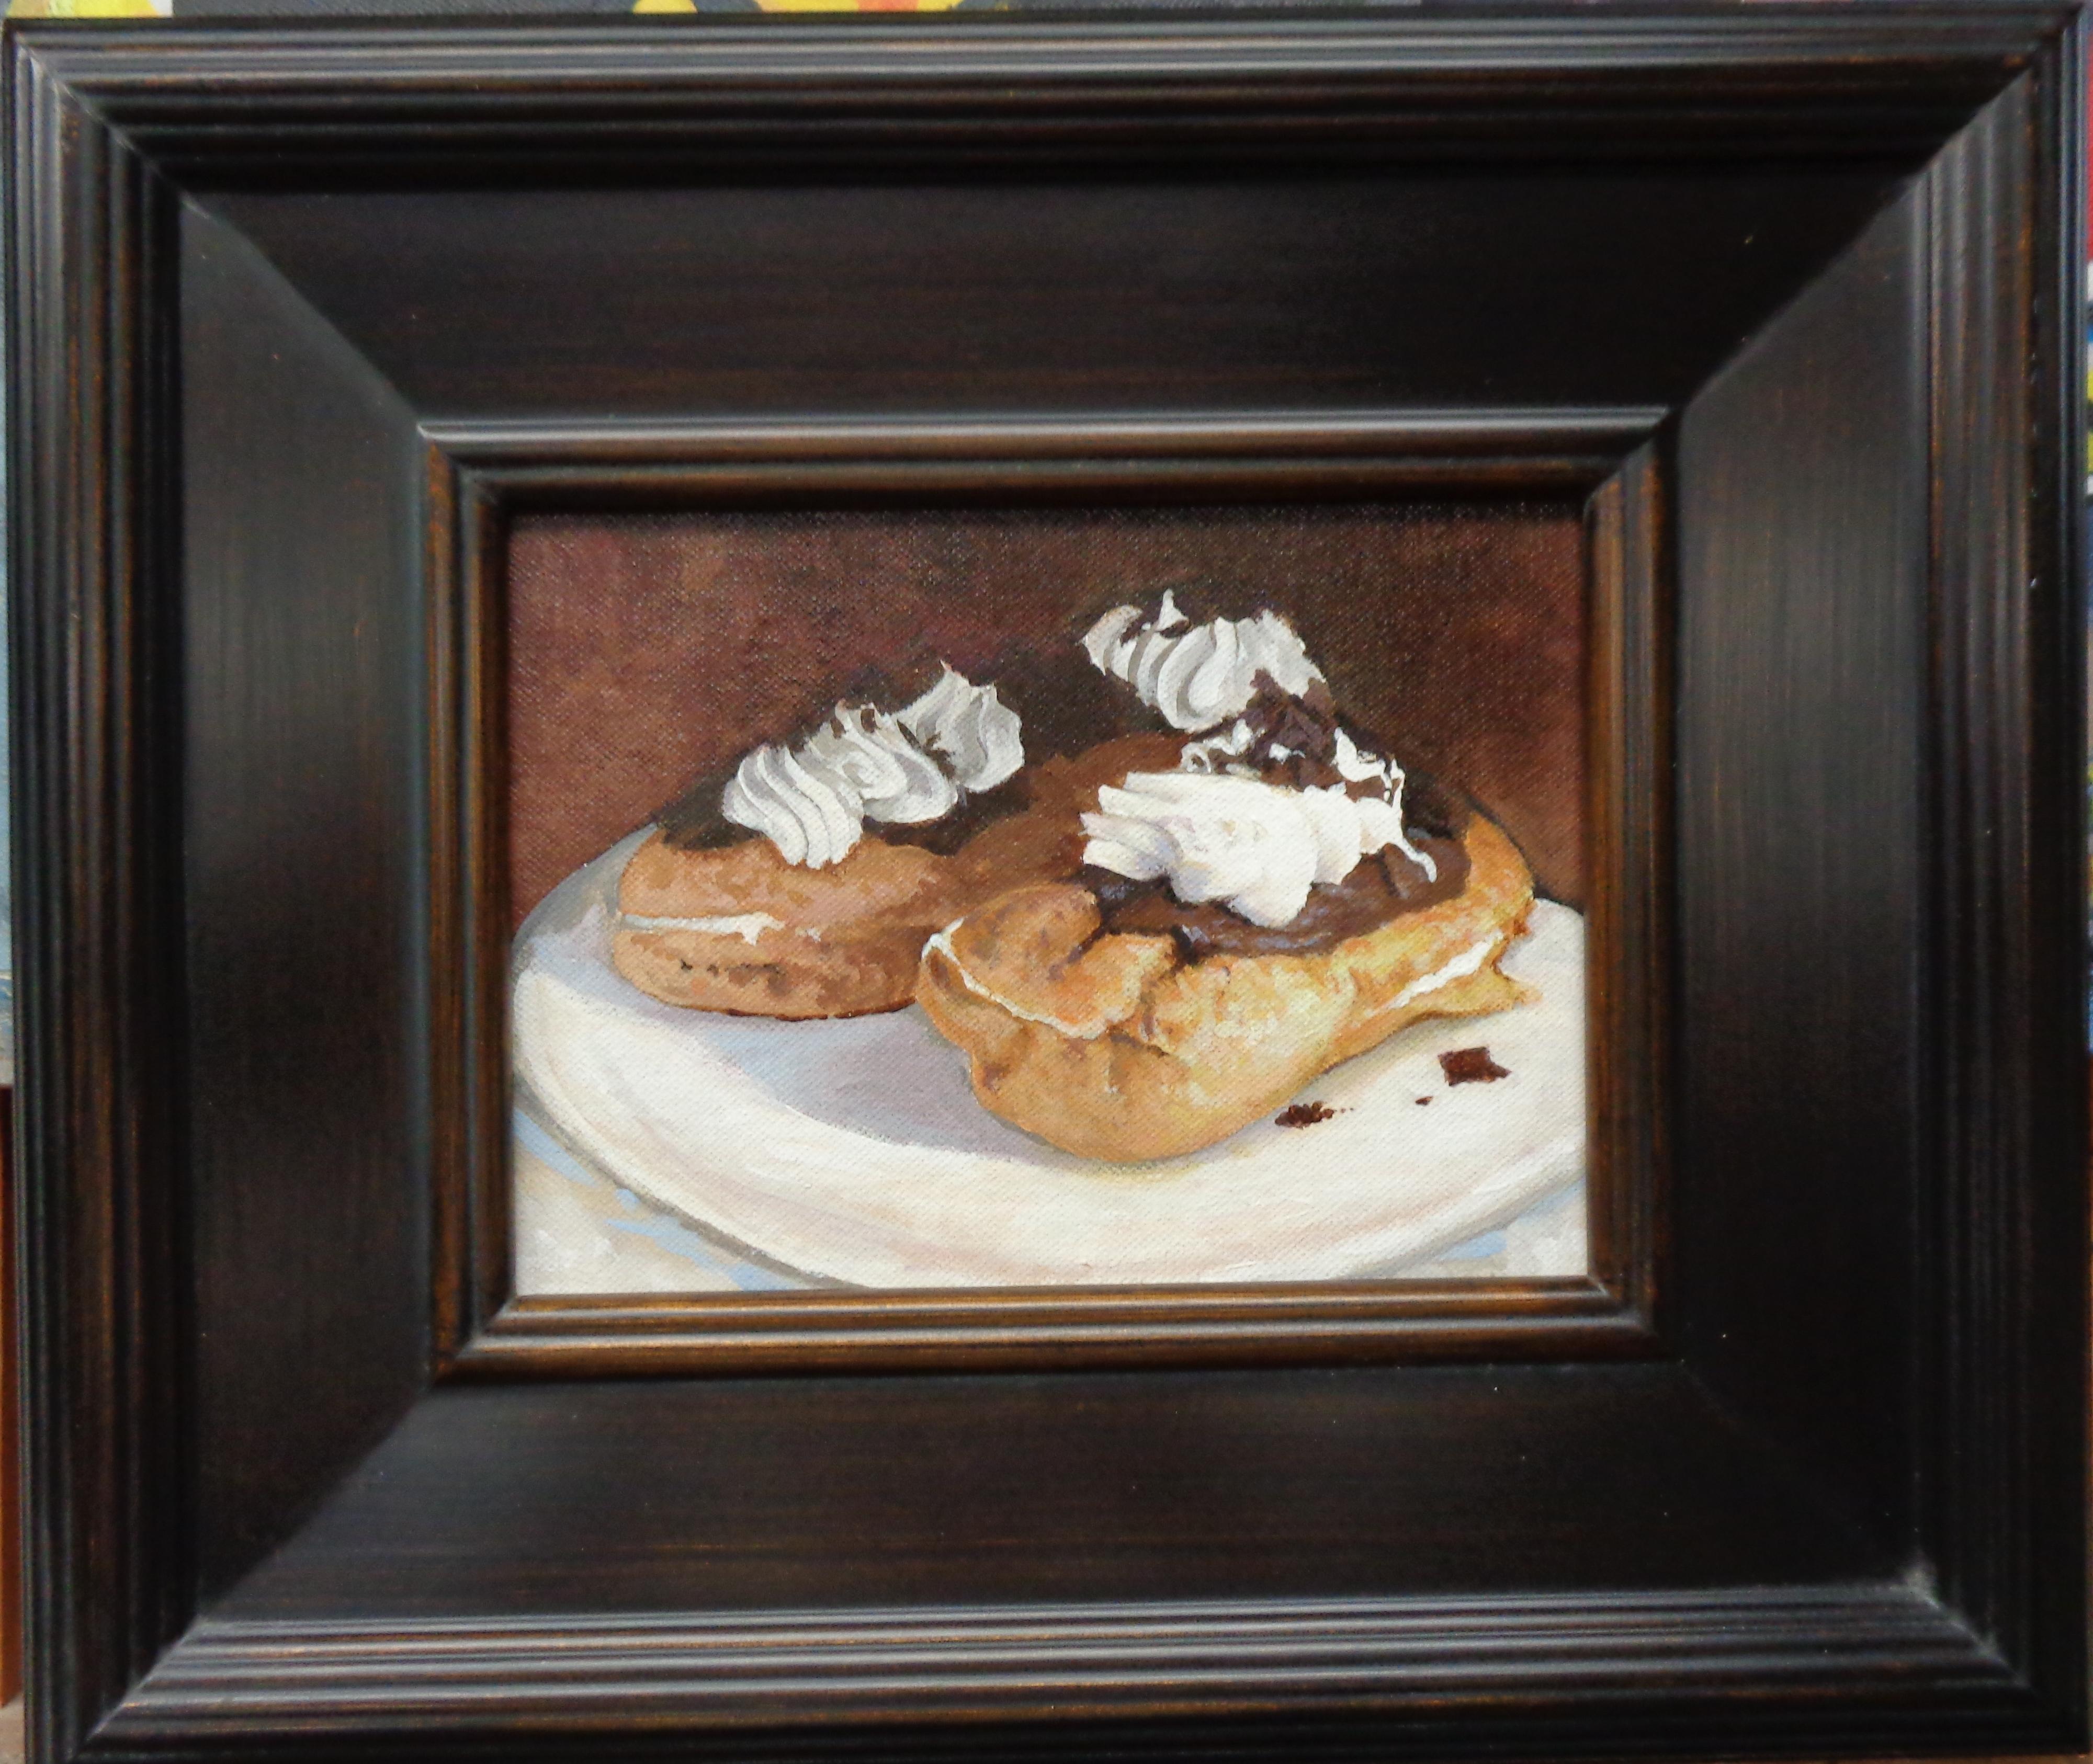 An oil painting on canvas by award winning contemporary artist Michael Budden that showcases a pair of eclairs. Image is 6 x 8 unframed.
ARTIST'S STATEMENT
I have been in the art business as an artist and dealer since the early 80's. Almost 40 years